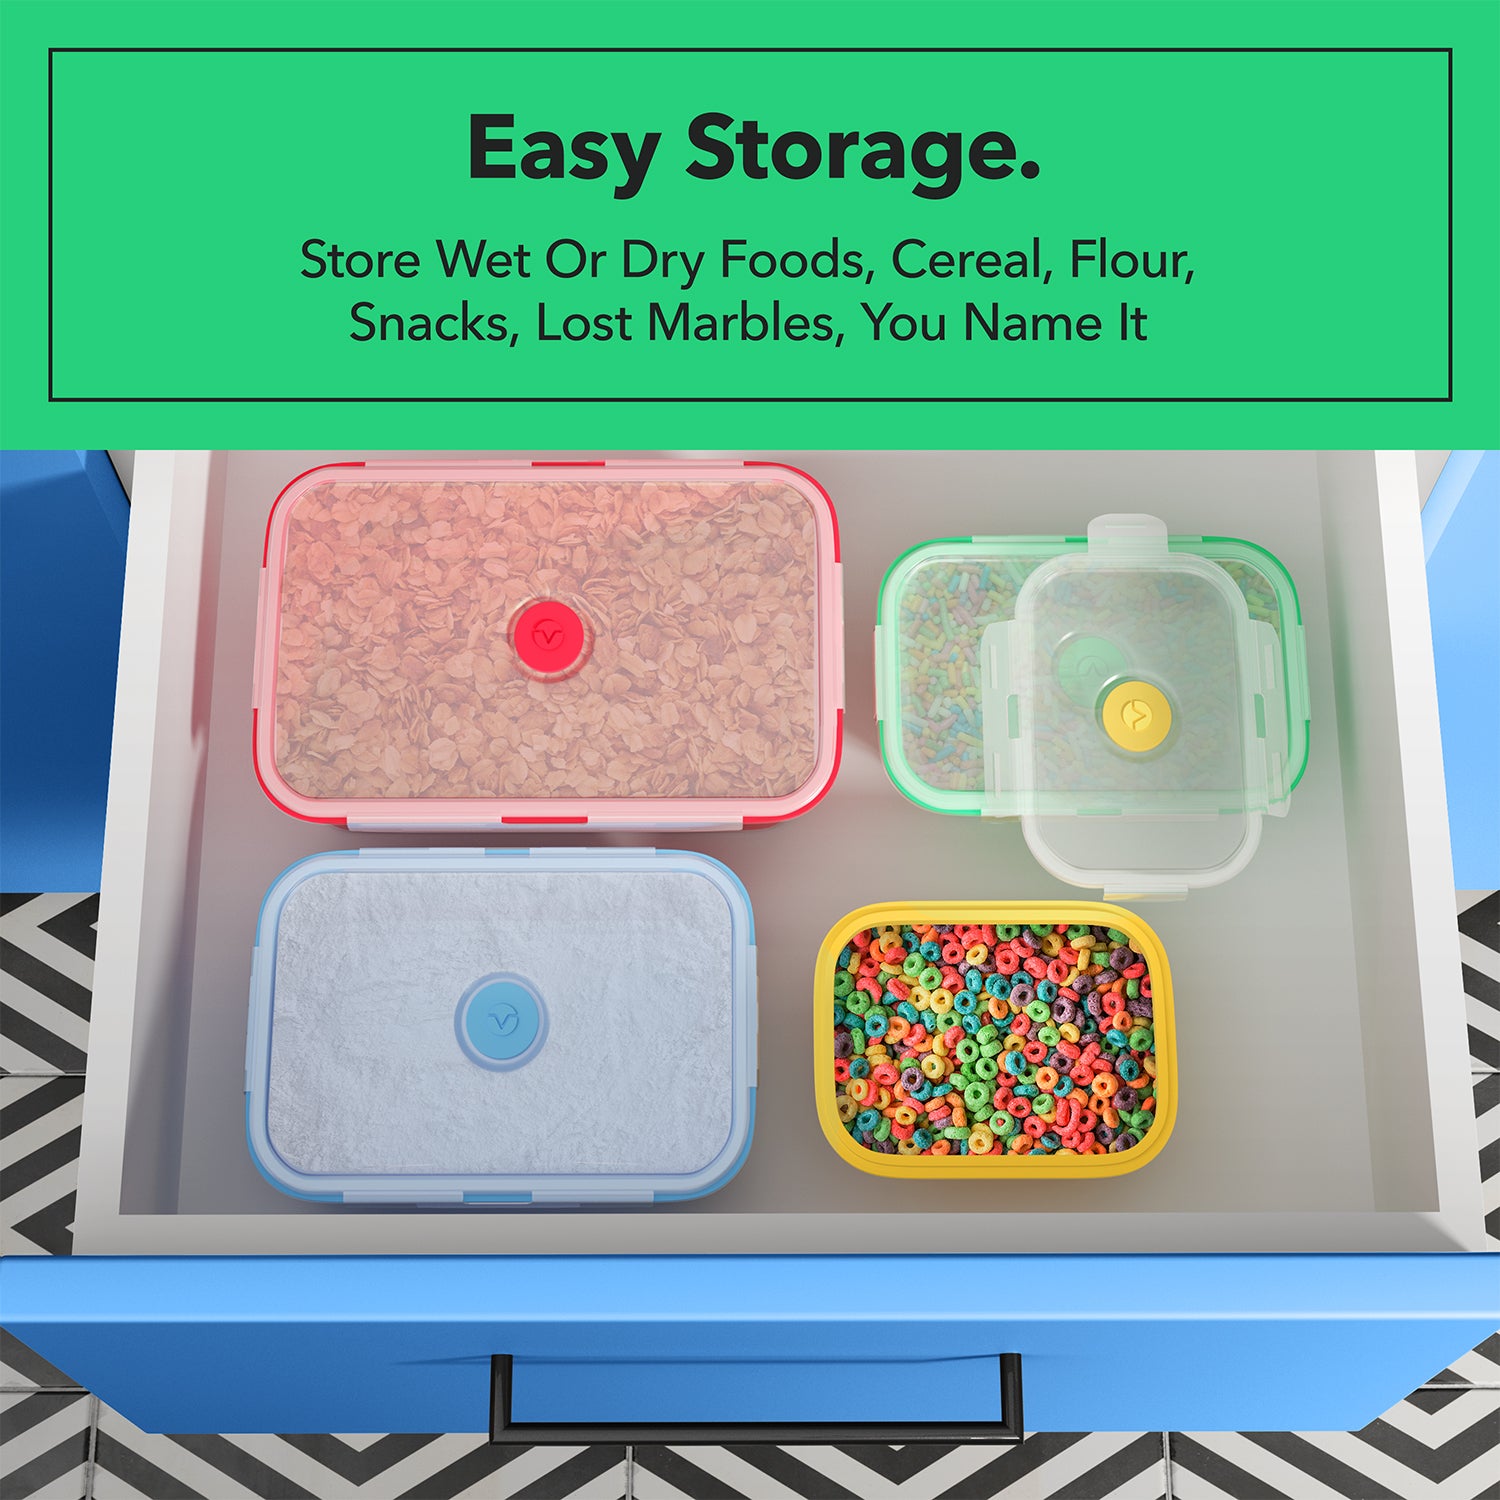 Vremi Silicone Food Storage Containers - Microwave and Freezer Safe